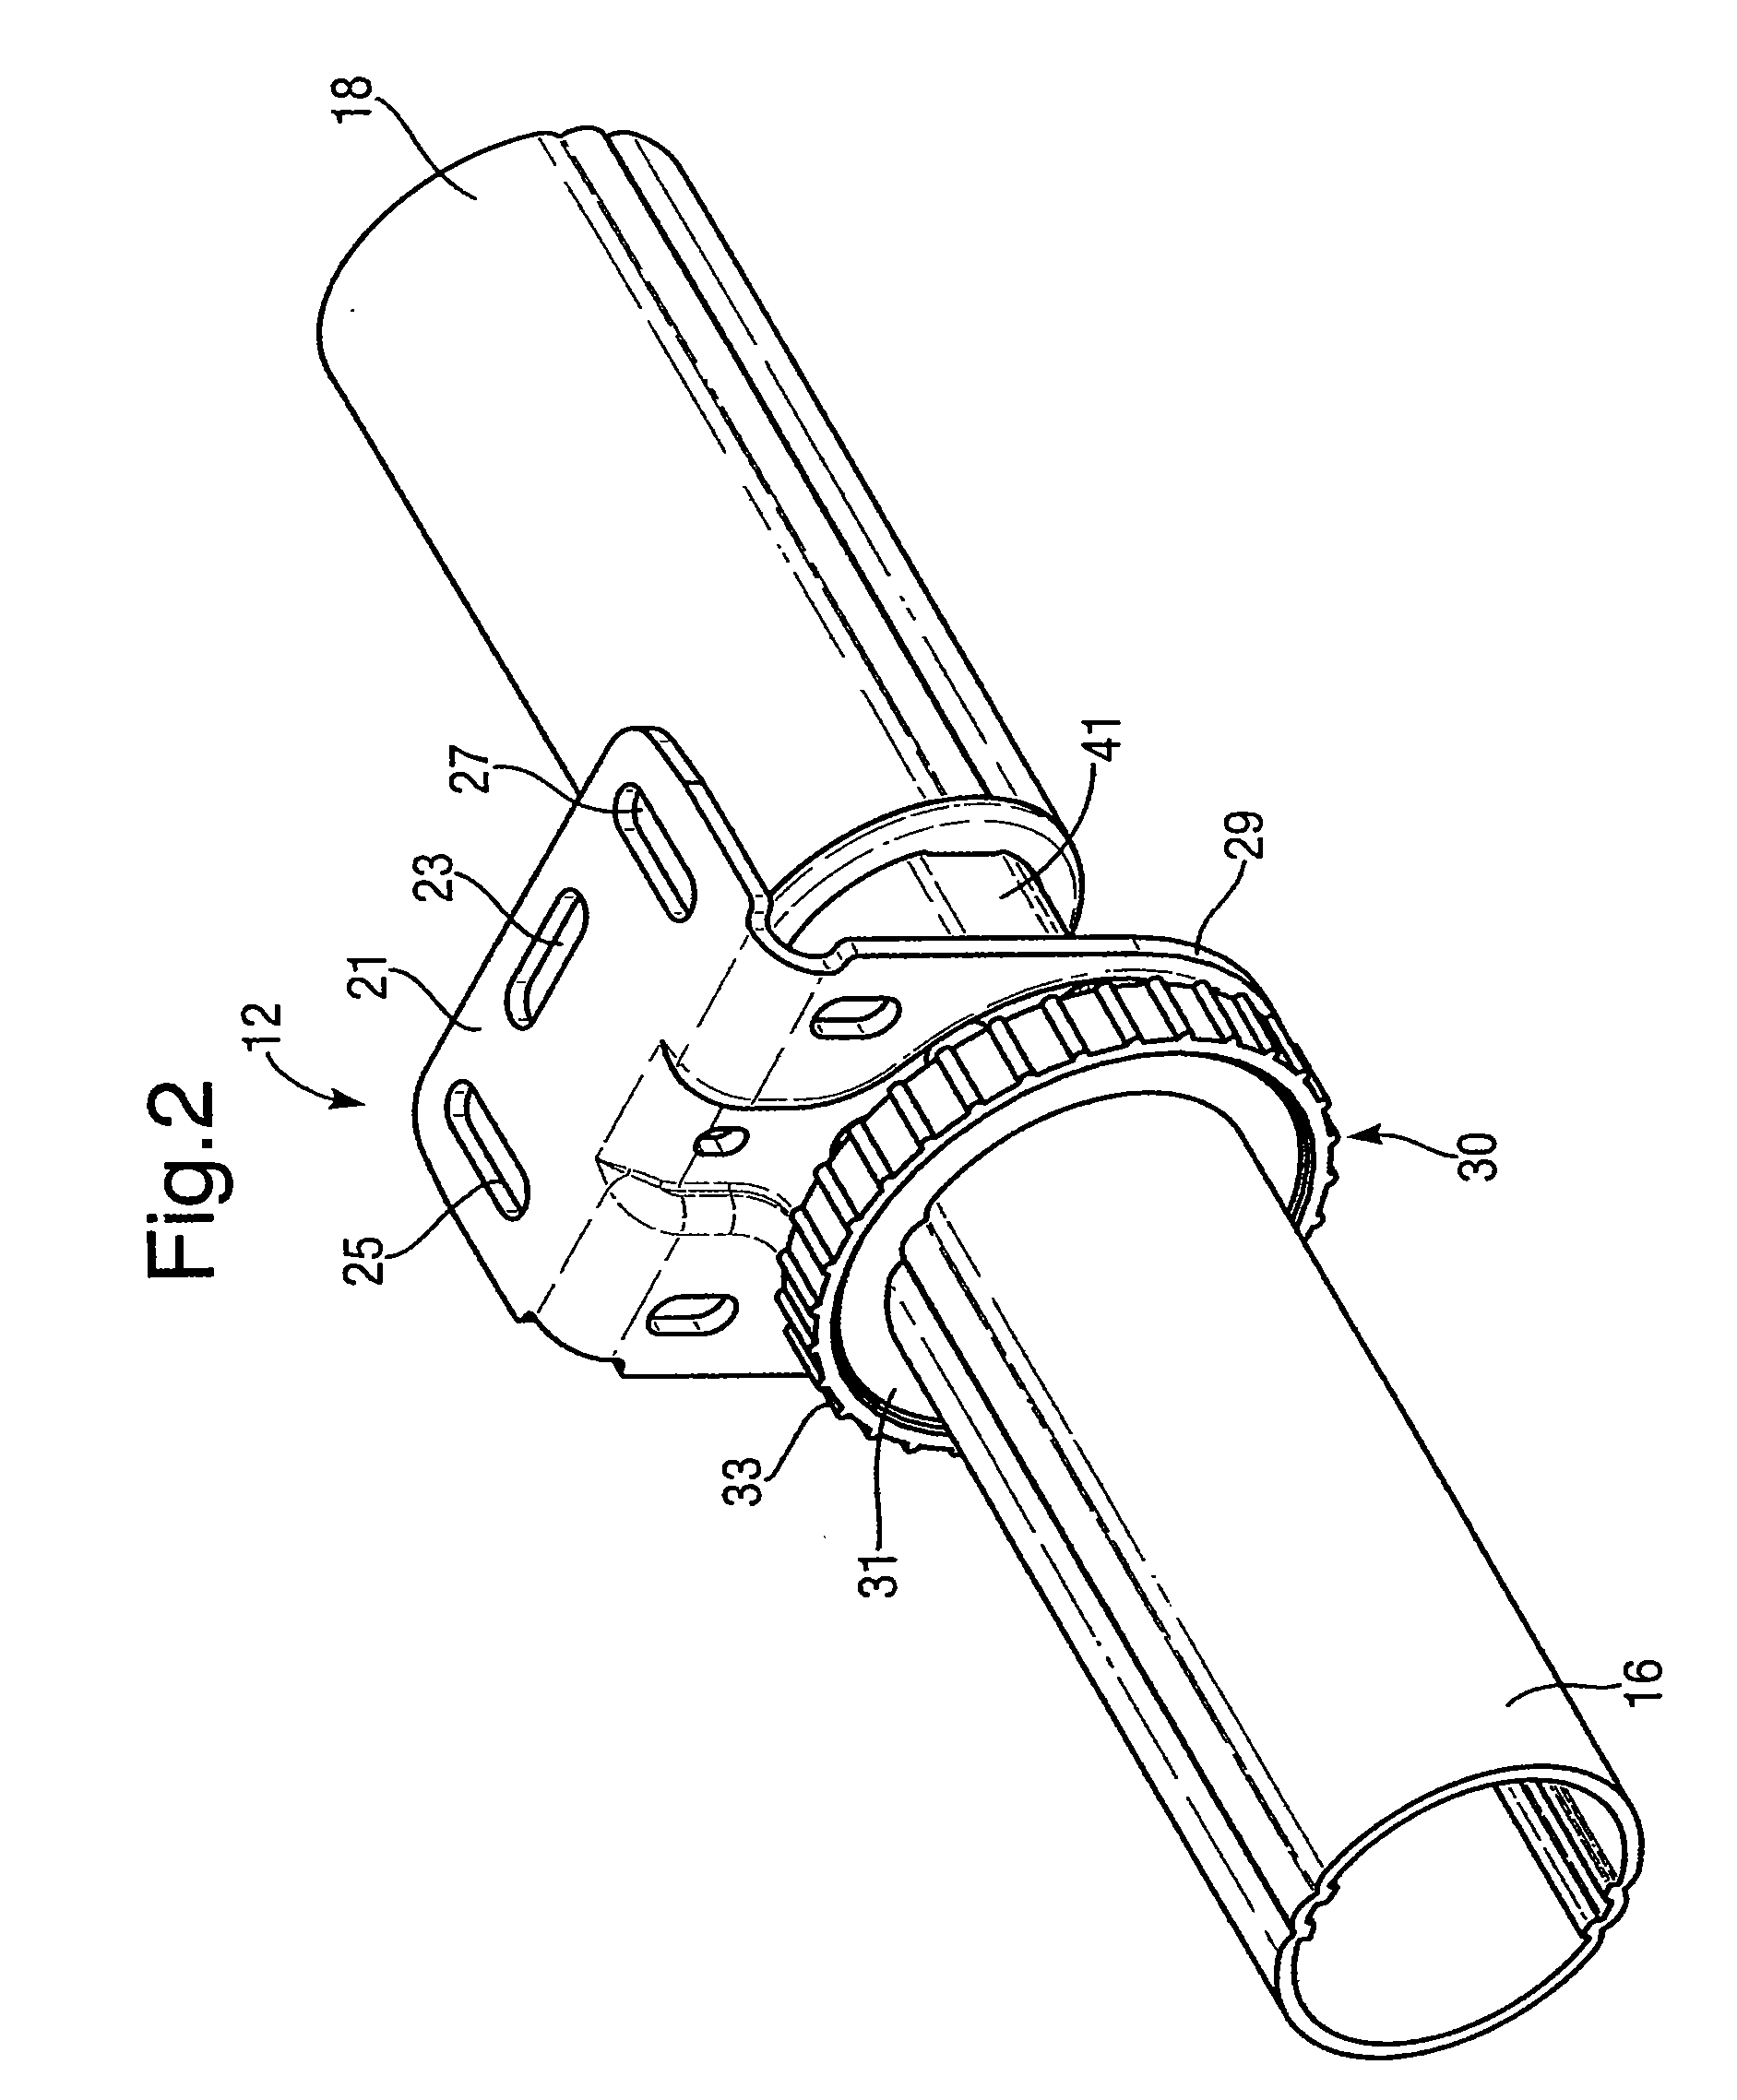 Adjustable drive coupling for adjacent architectural coverings